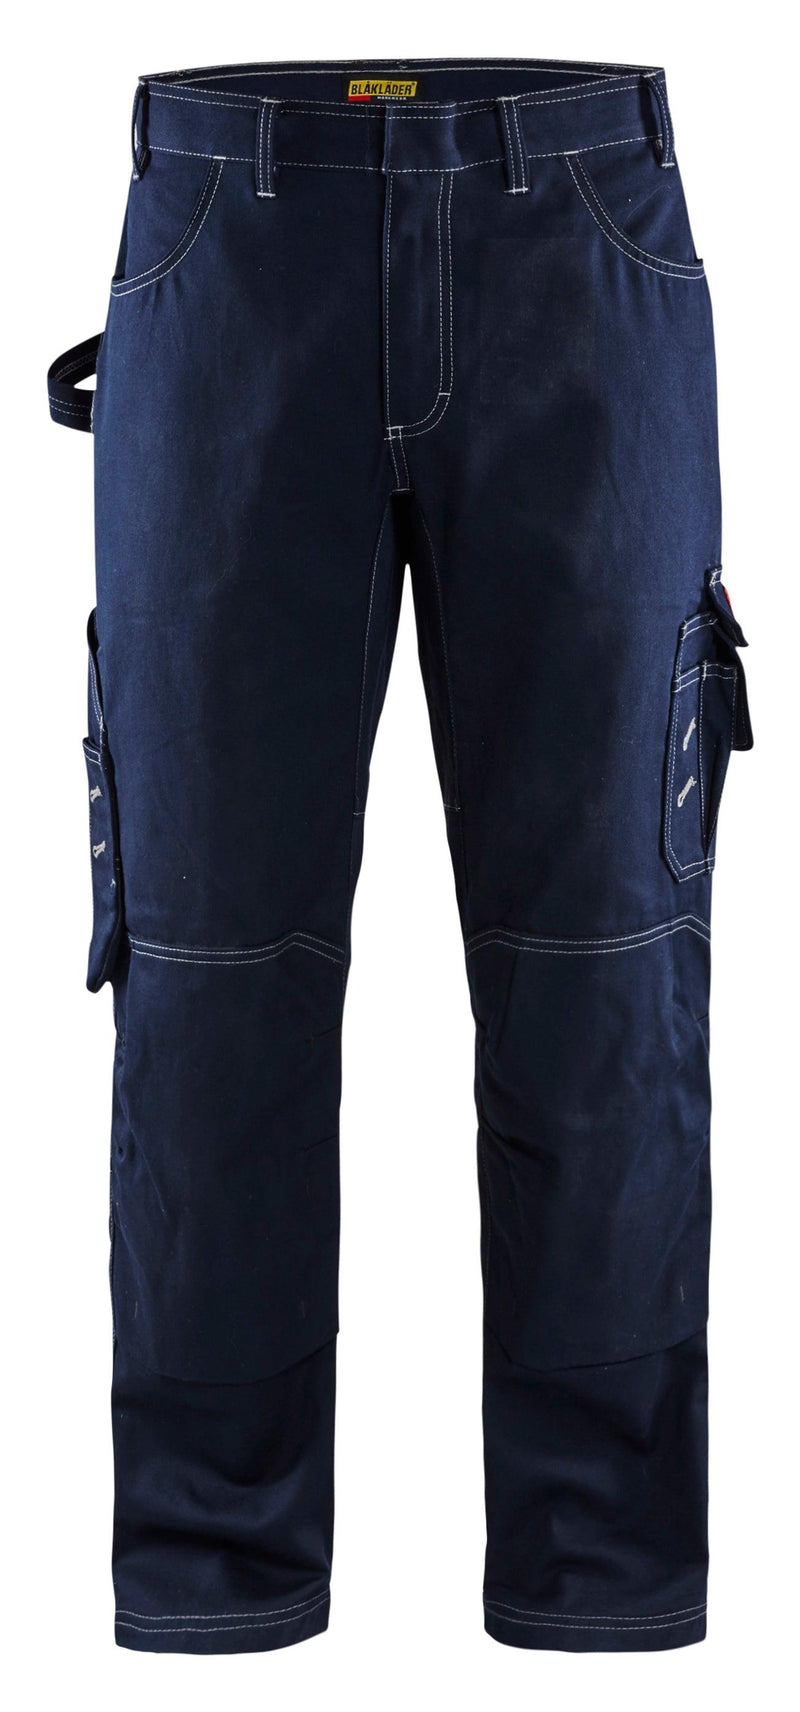 Blaklader 1676 10oz Flame Resistant Work Pants - Navy Blue - Trusted Gear Company LLC